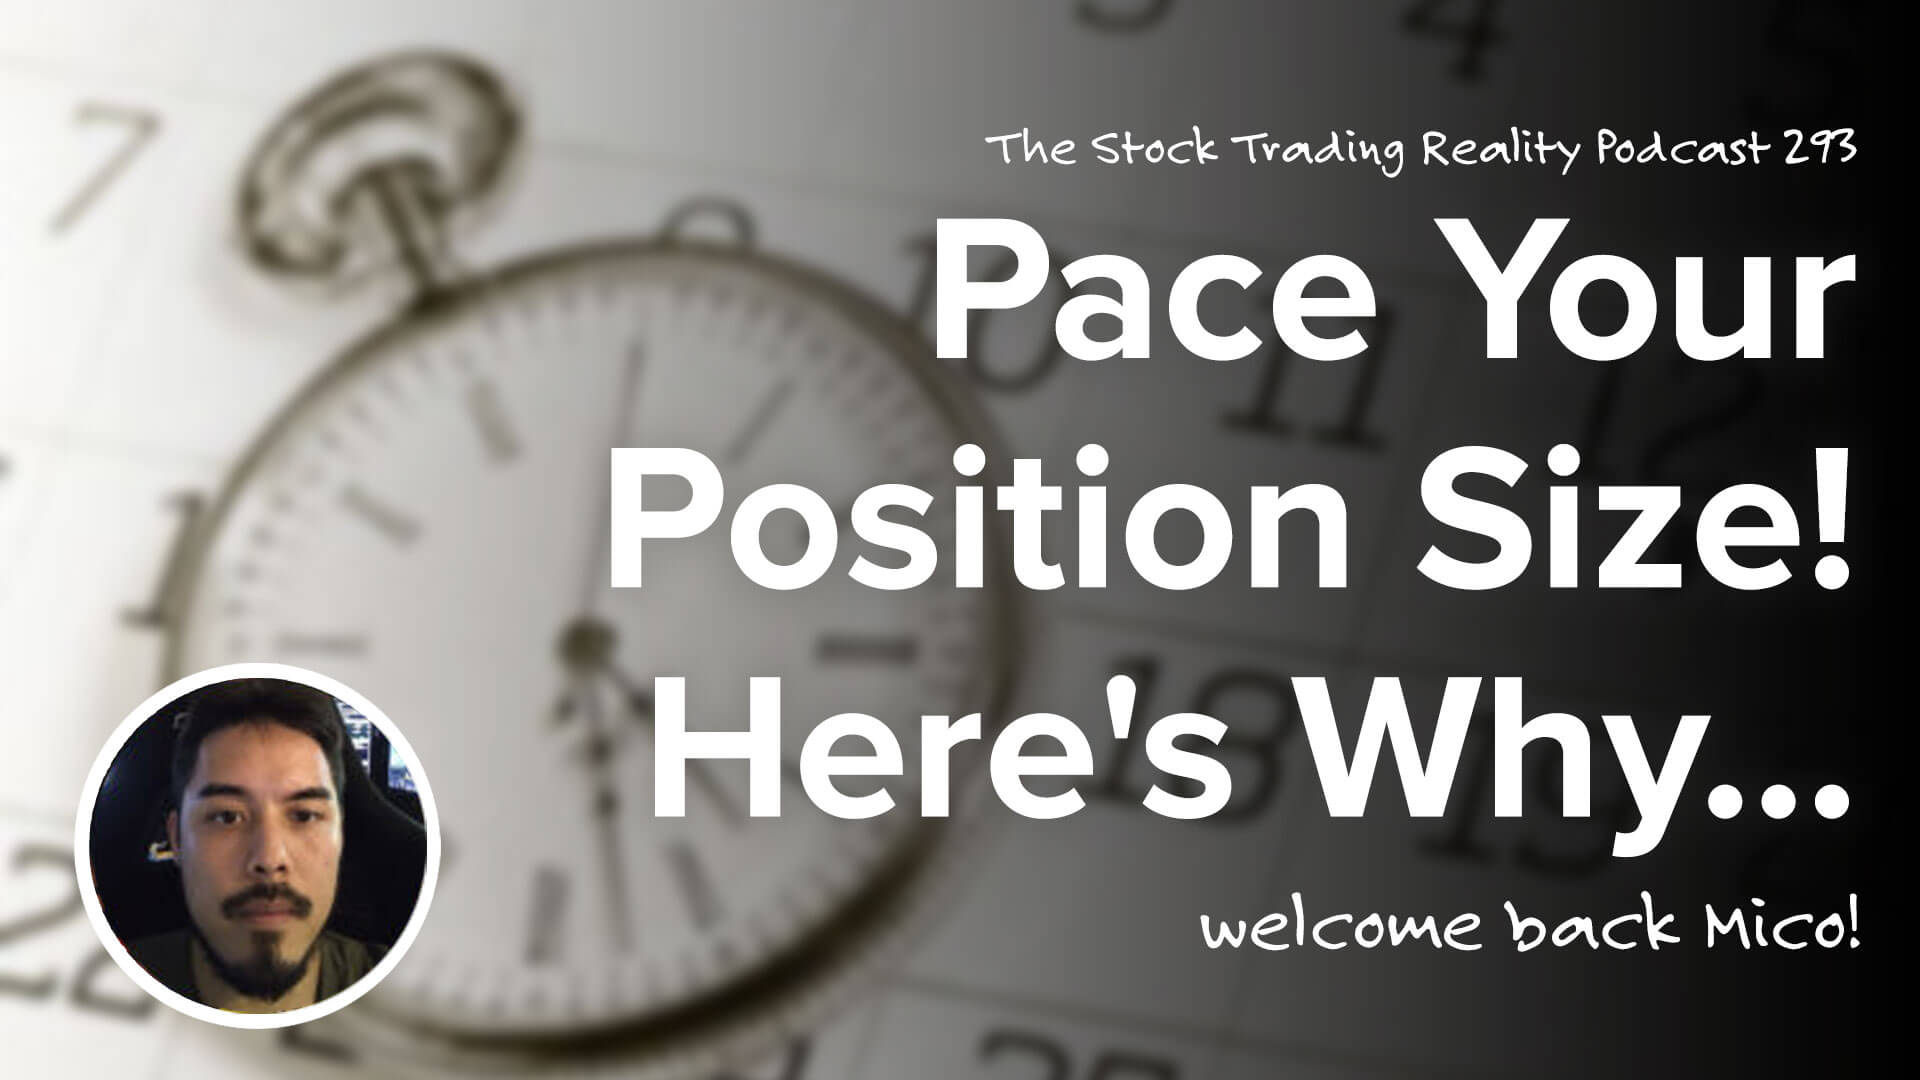 Pace Your Position Size! Here's Why...